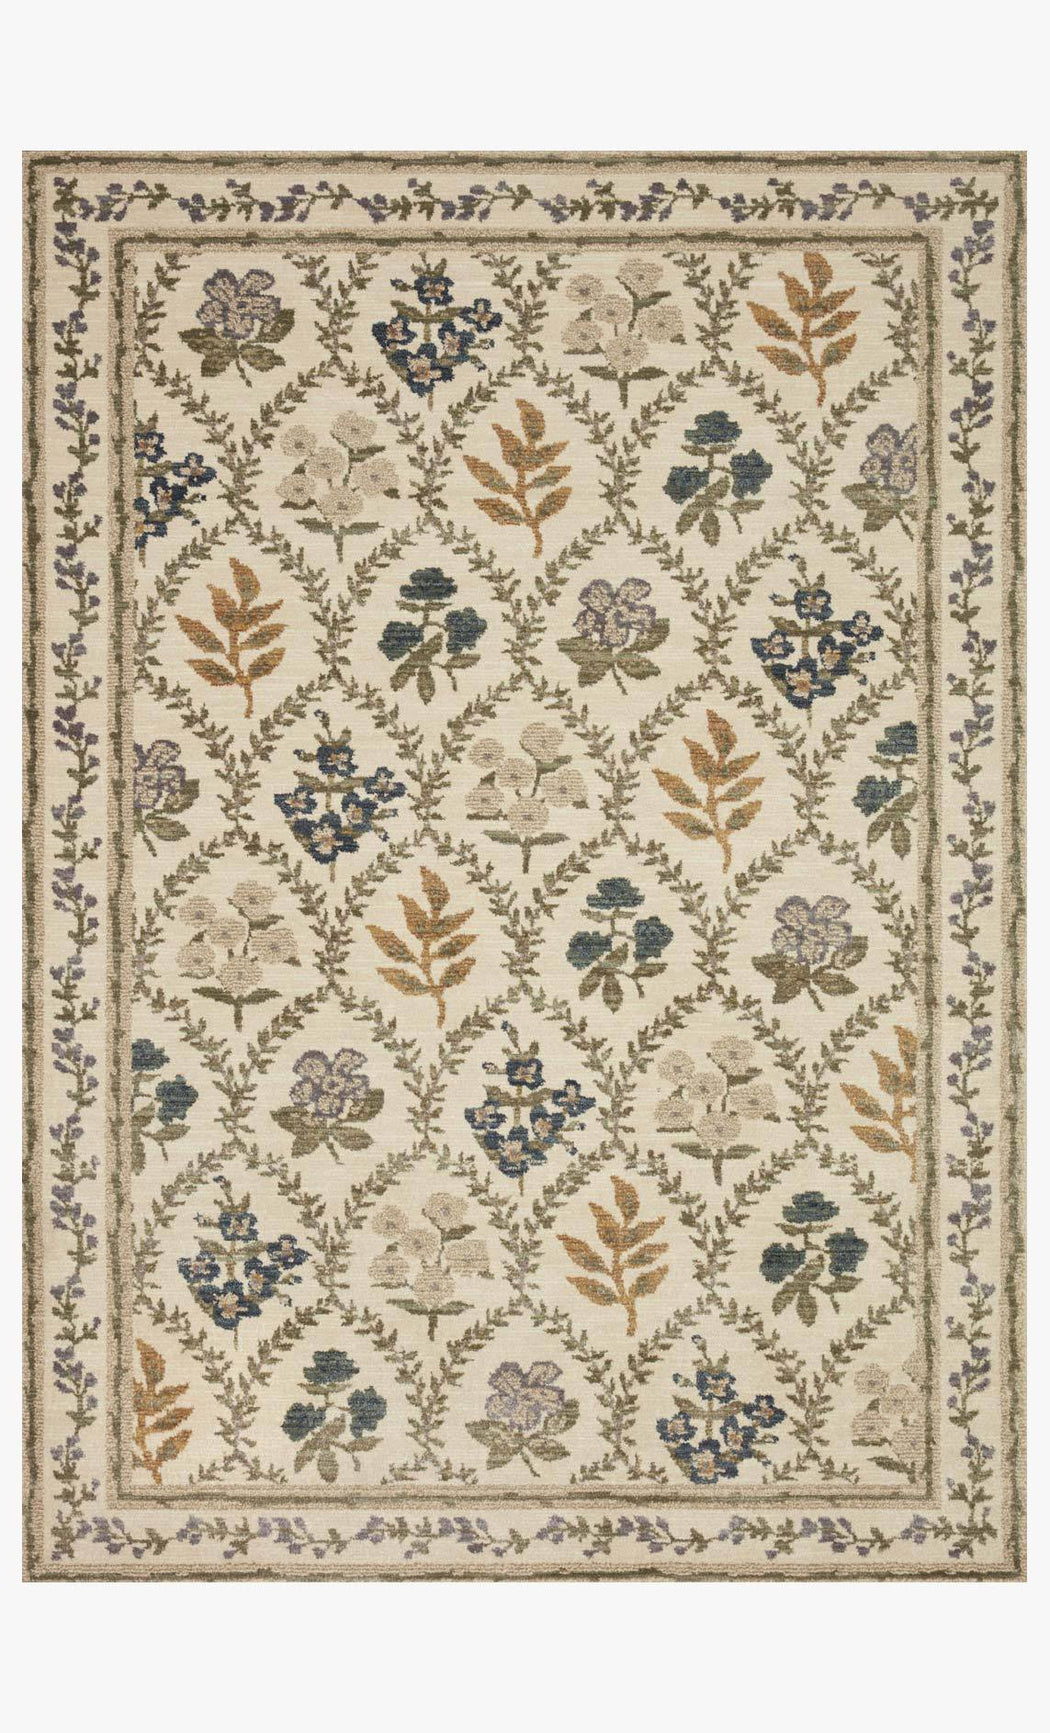 Fiore Florence Rug | Hawthorne Ivory